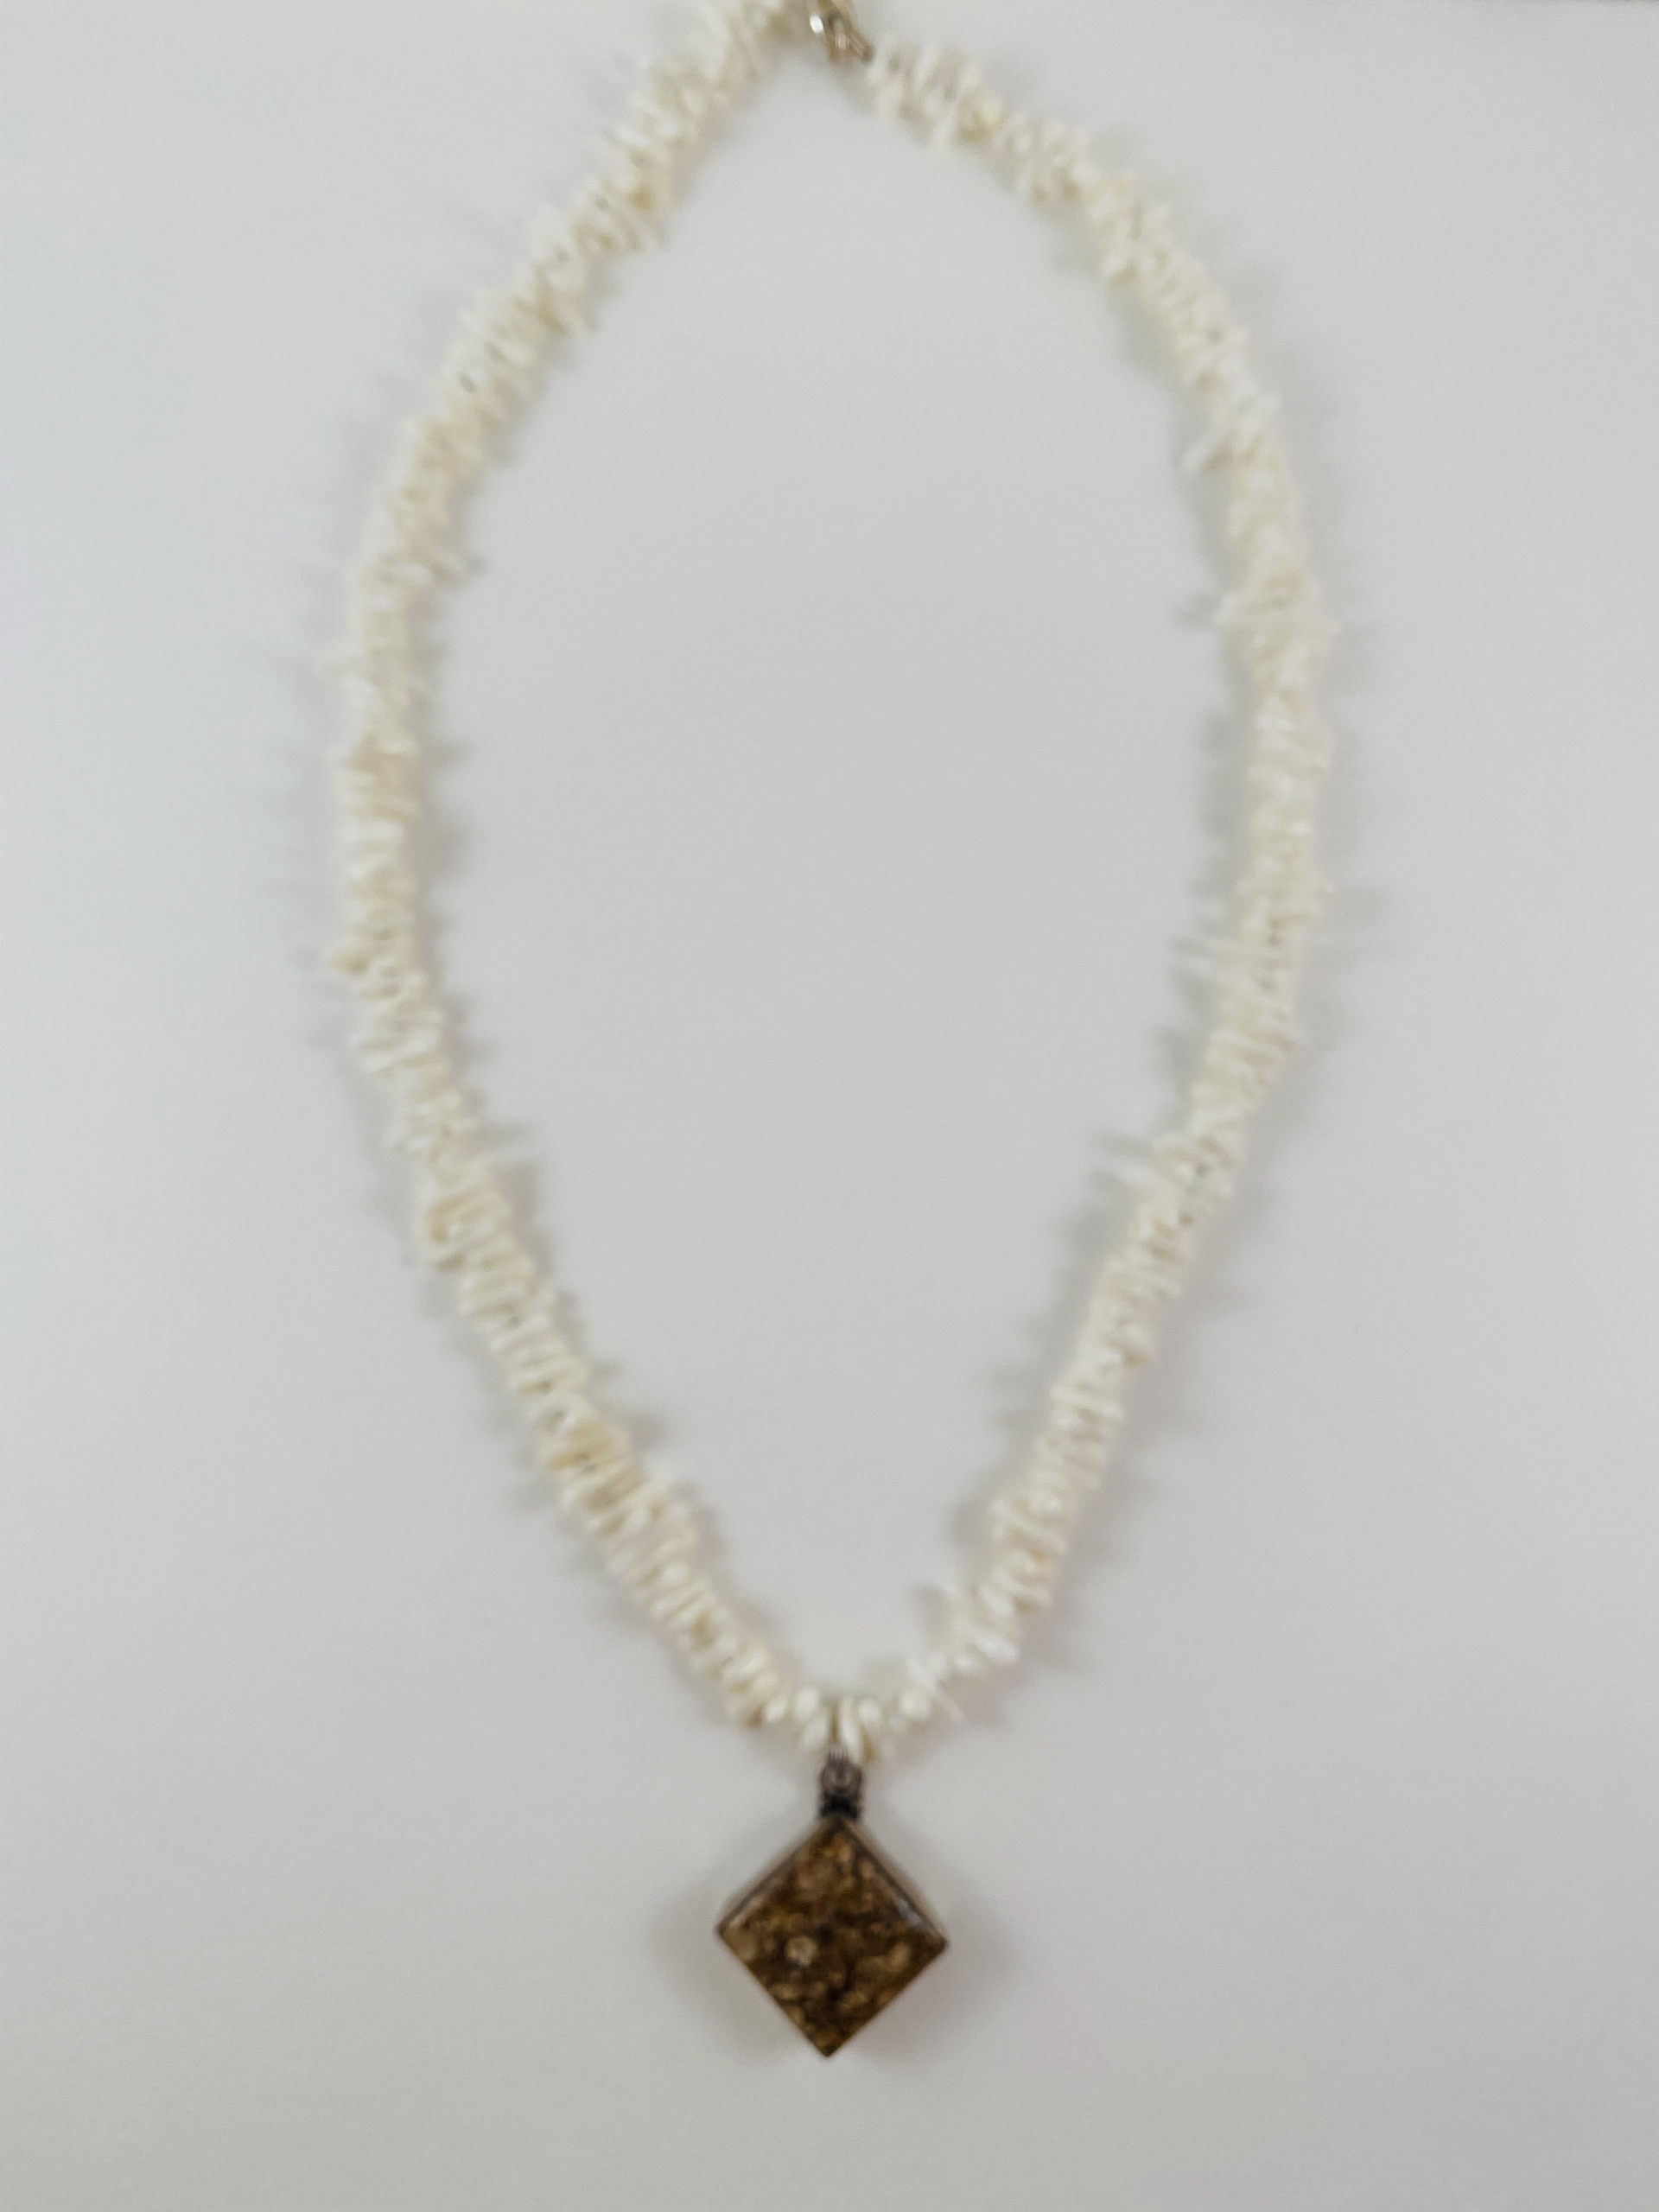 White Branch Coral Necklace, fossilized stone pendant by Nance Trueworthy